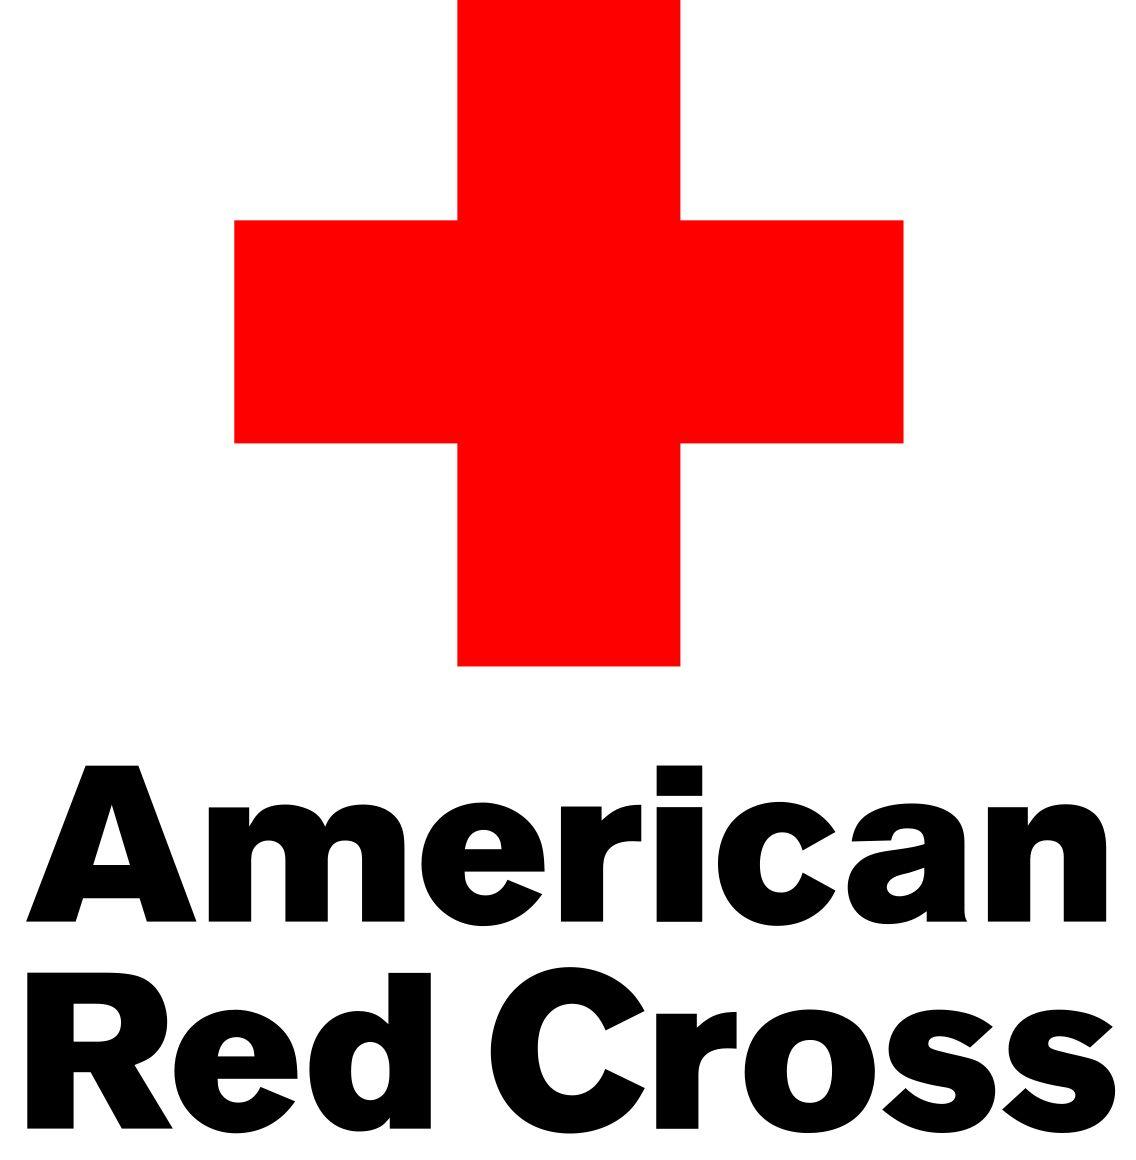 Official American Red Cross Logo - American Red Cross Logo, American Red Cross Symbol, Meaning, History